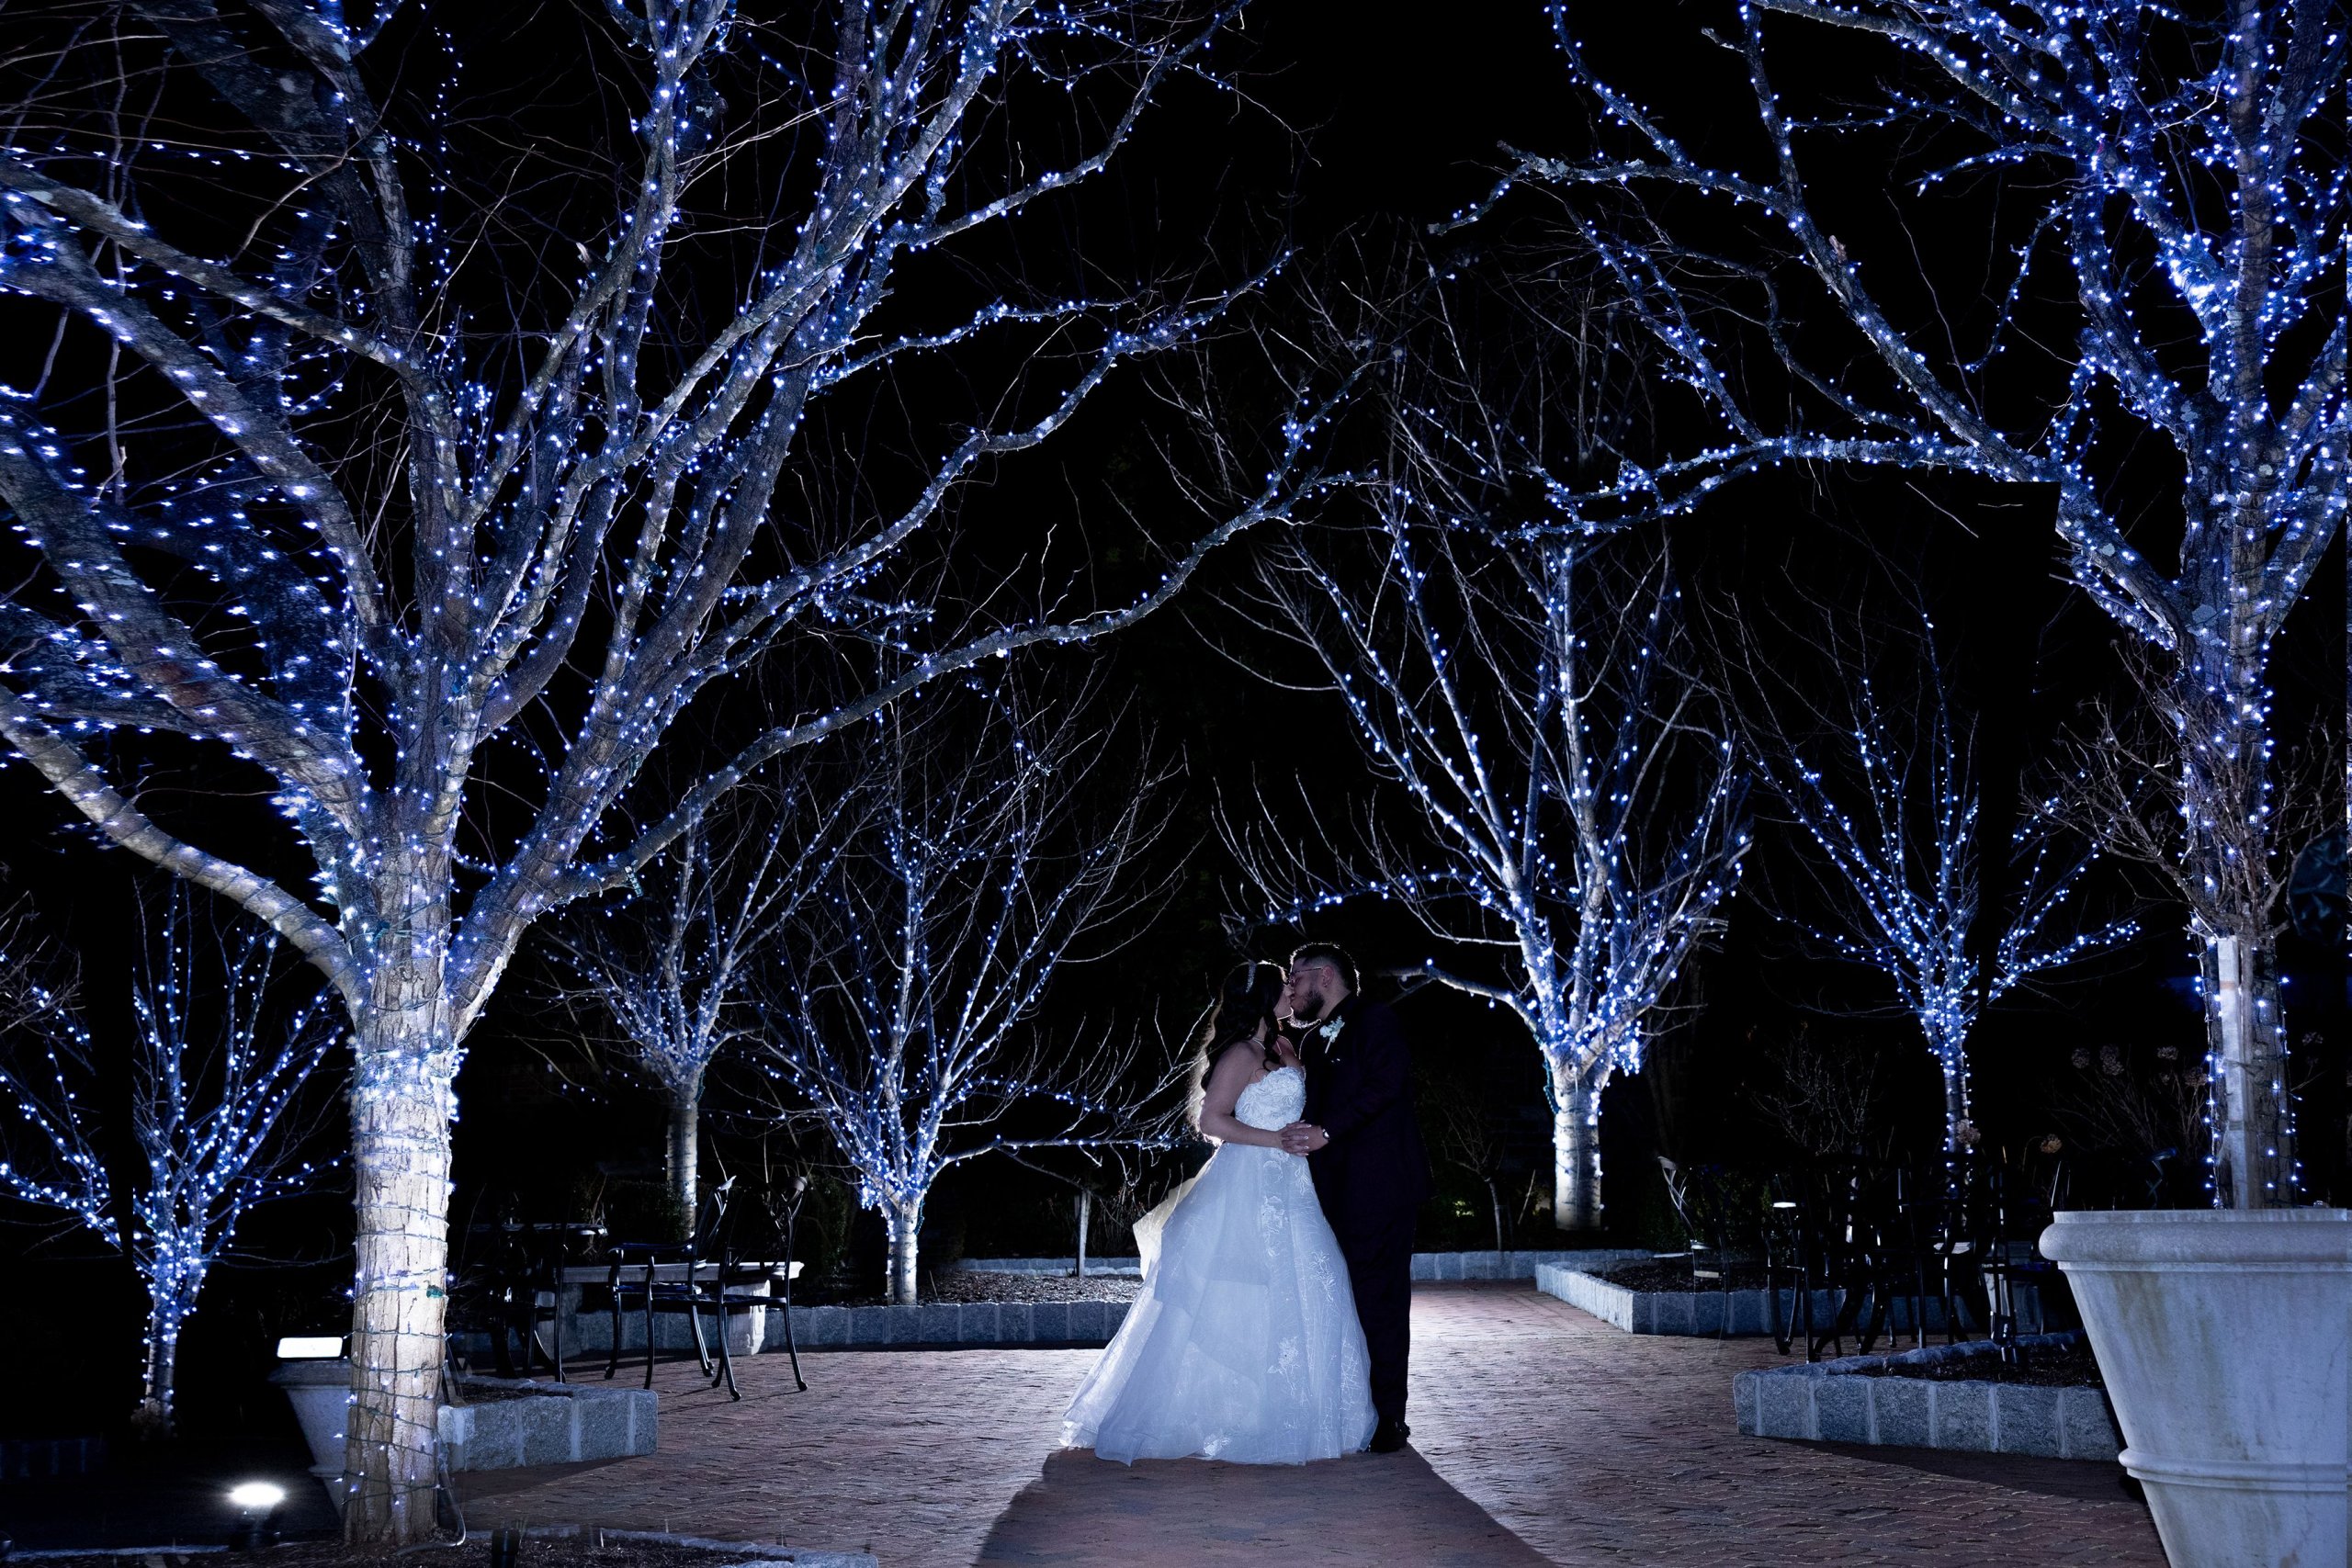 A bride and groom standing in front of a walkway lit up with blue lights.